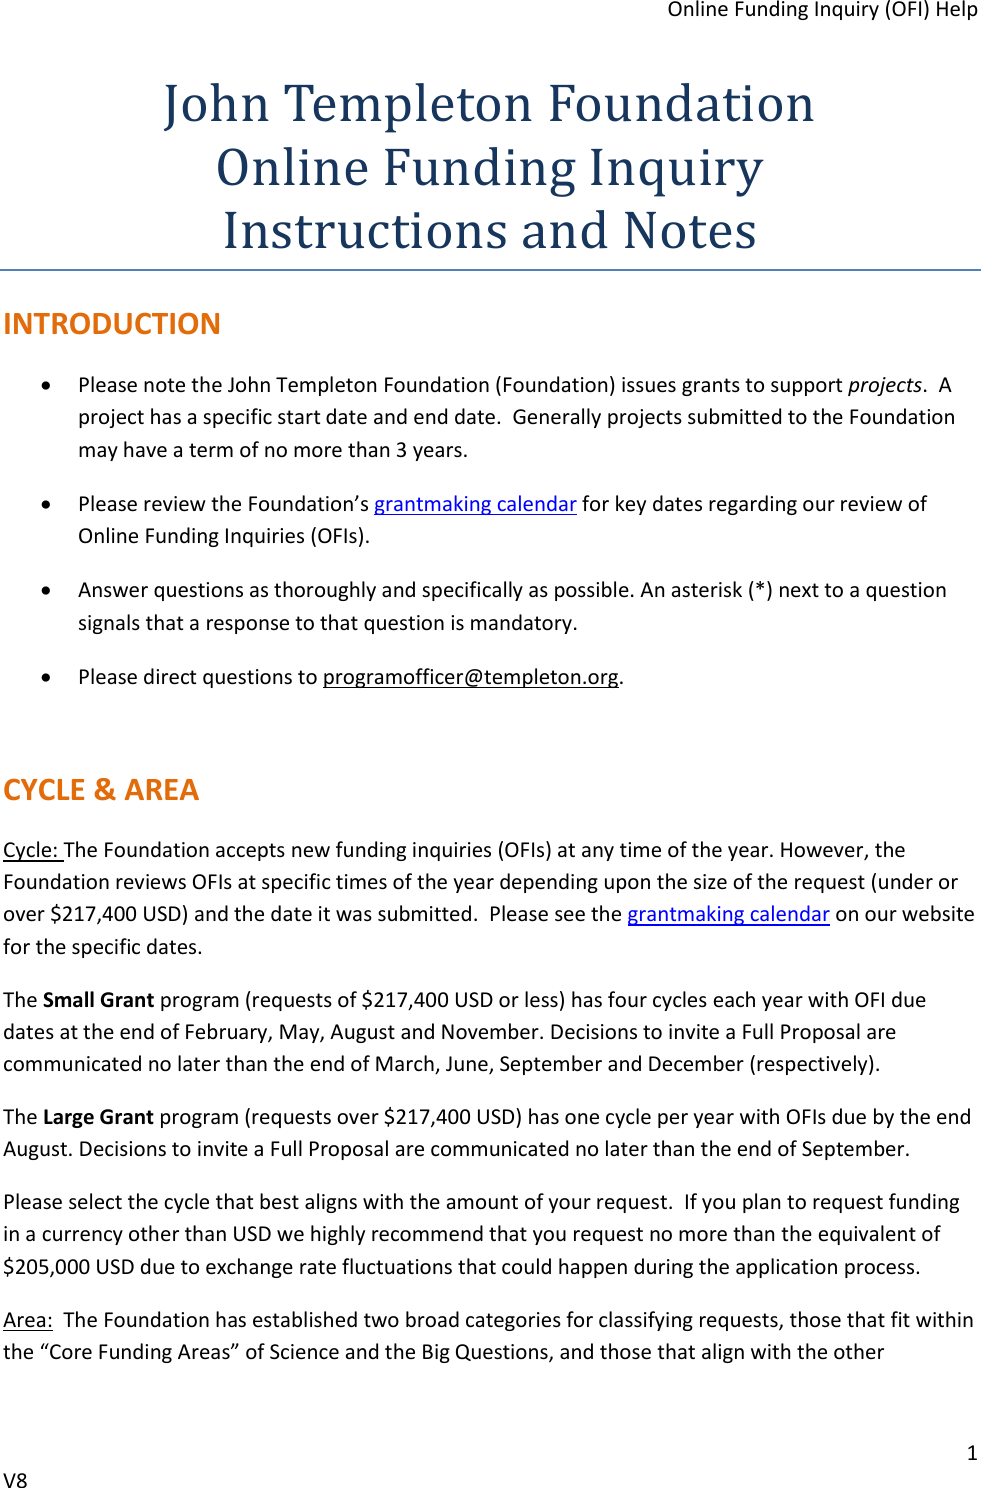 Page 1 of 7 - John Templeton Foundation OFI Instructions And Notes